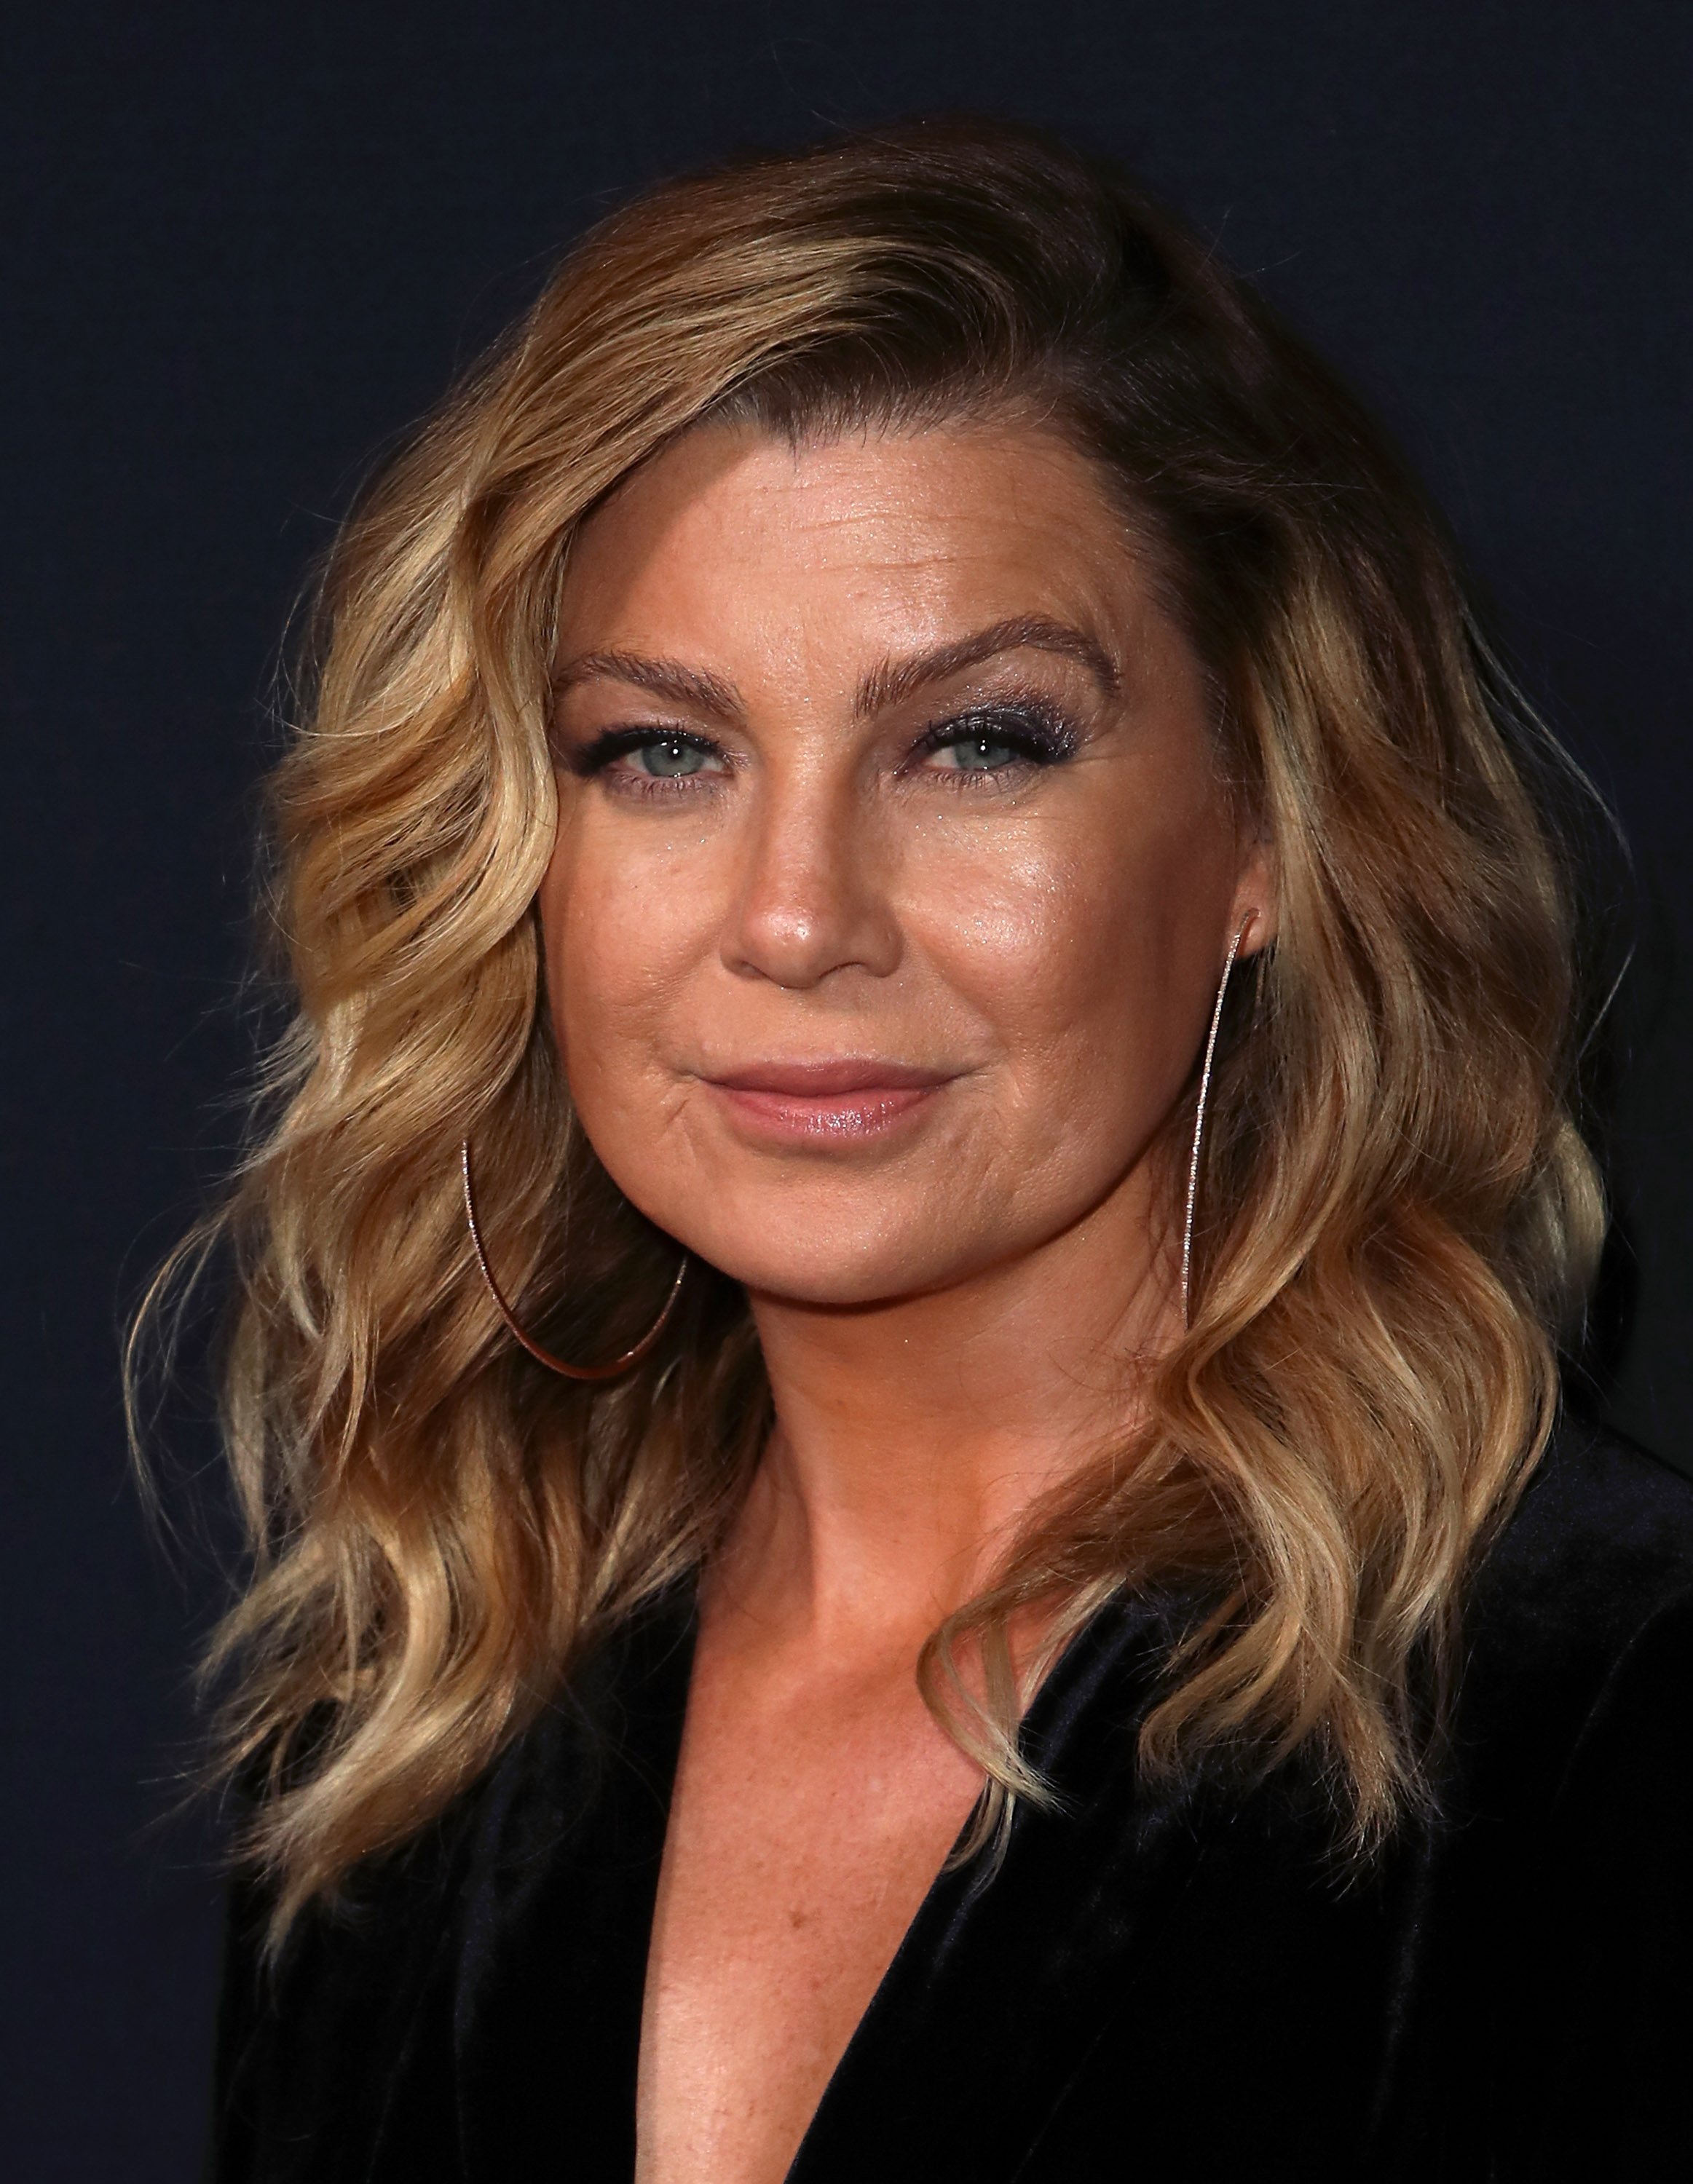 Actress Ellen Pompeo attends the 300th episode celebration of the series "Grey's Anatomy" on November 4, 2007. | Source: David Livingston/Getty Images